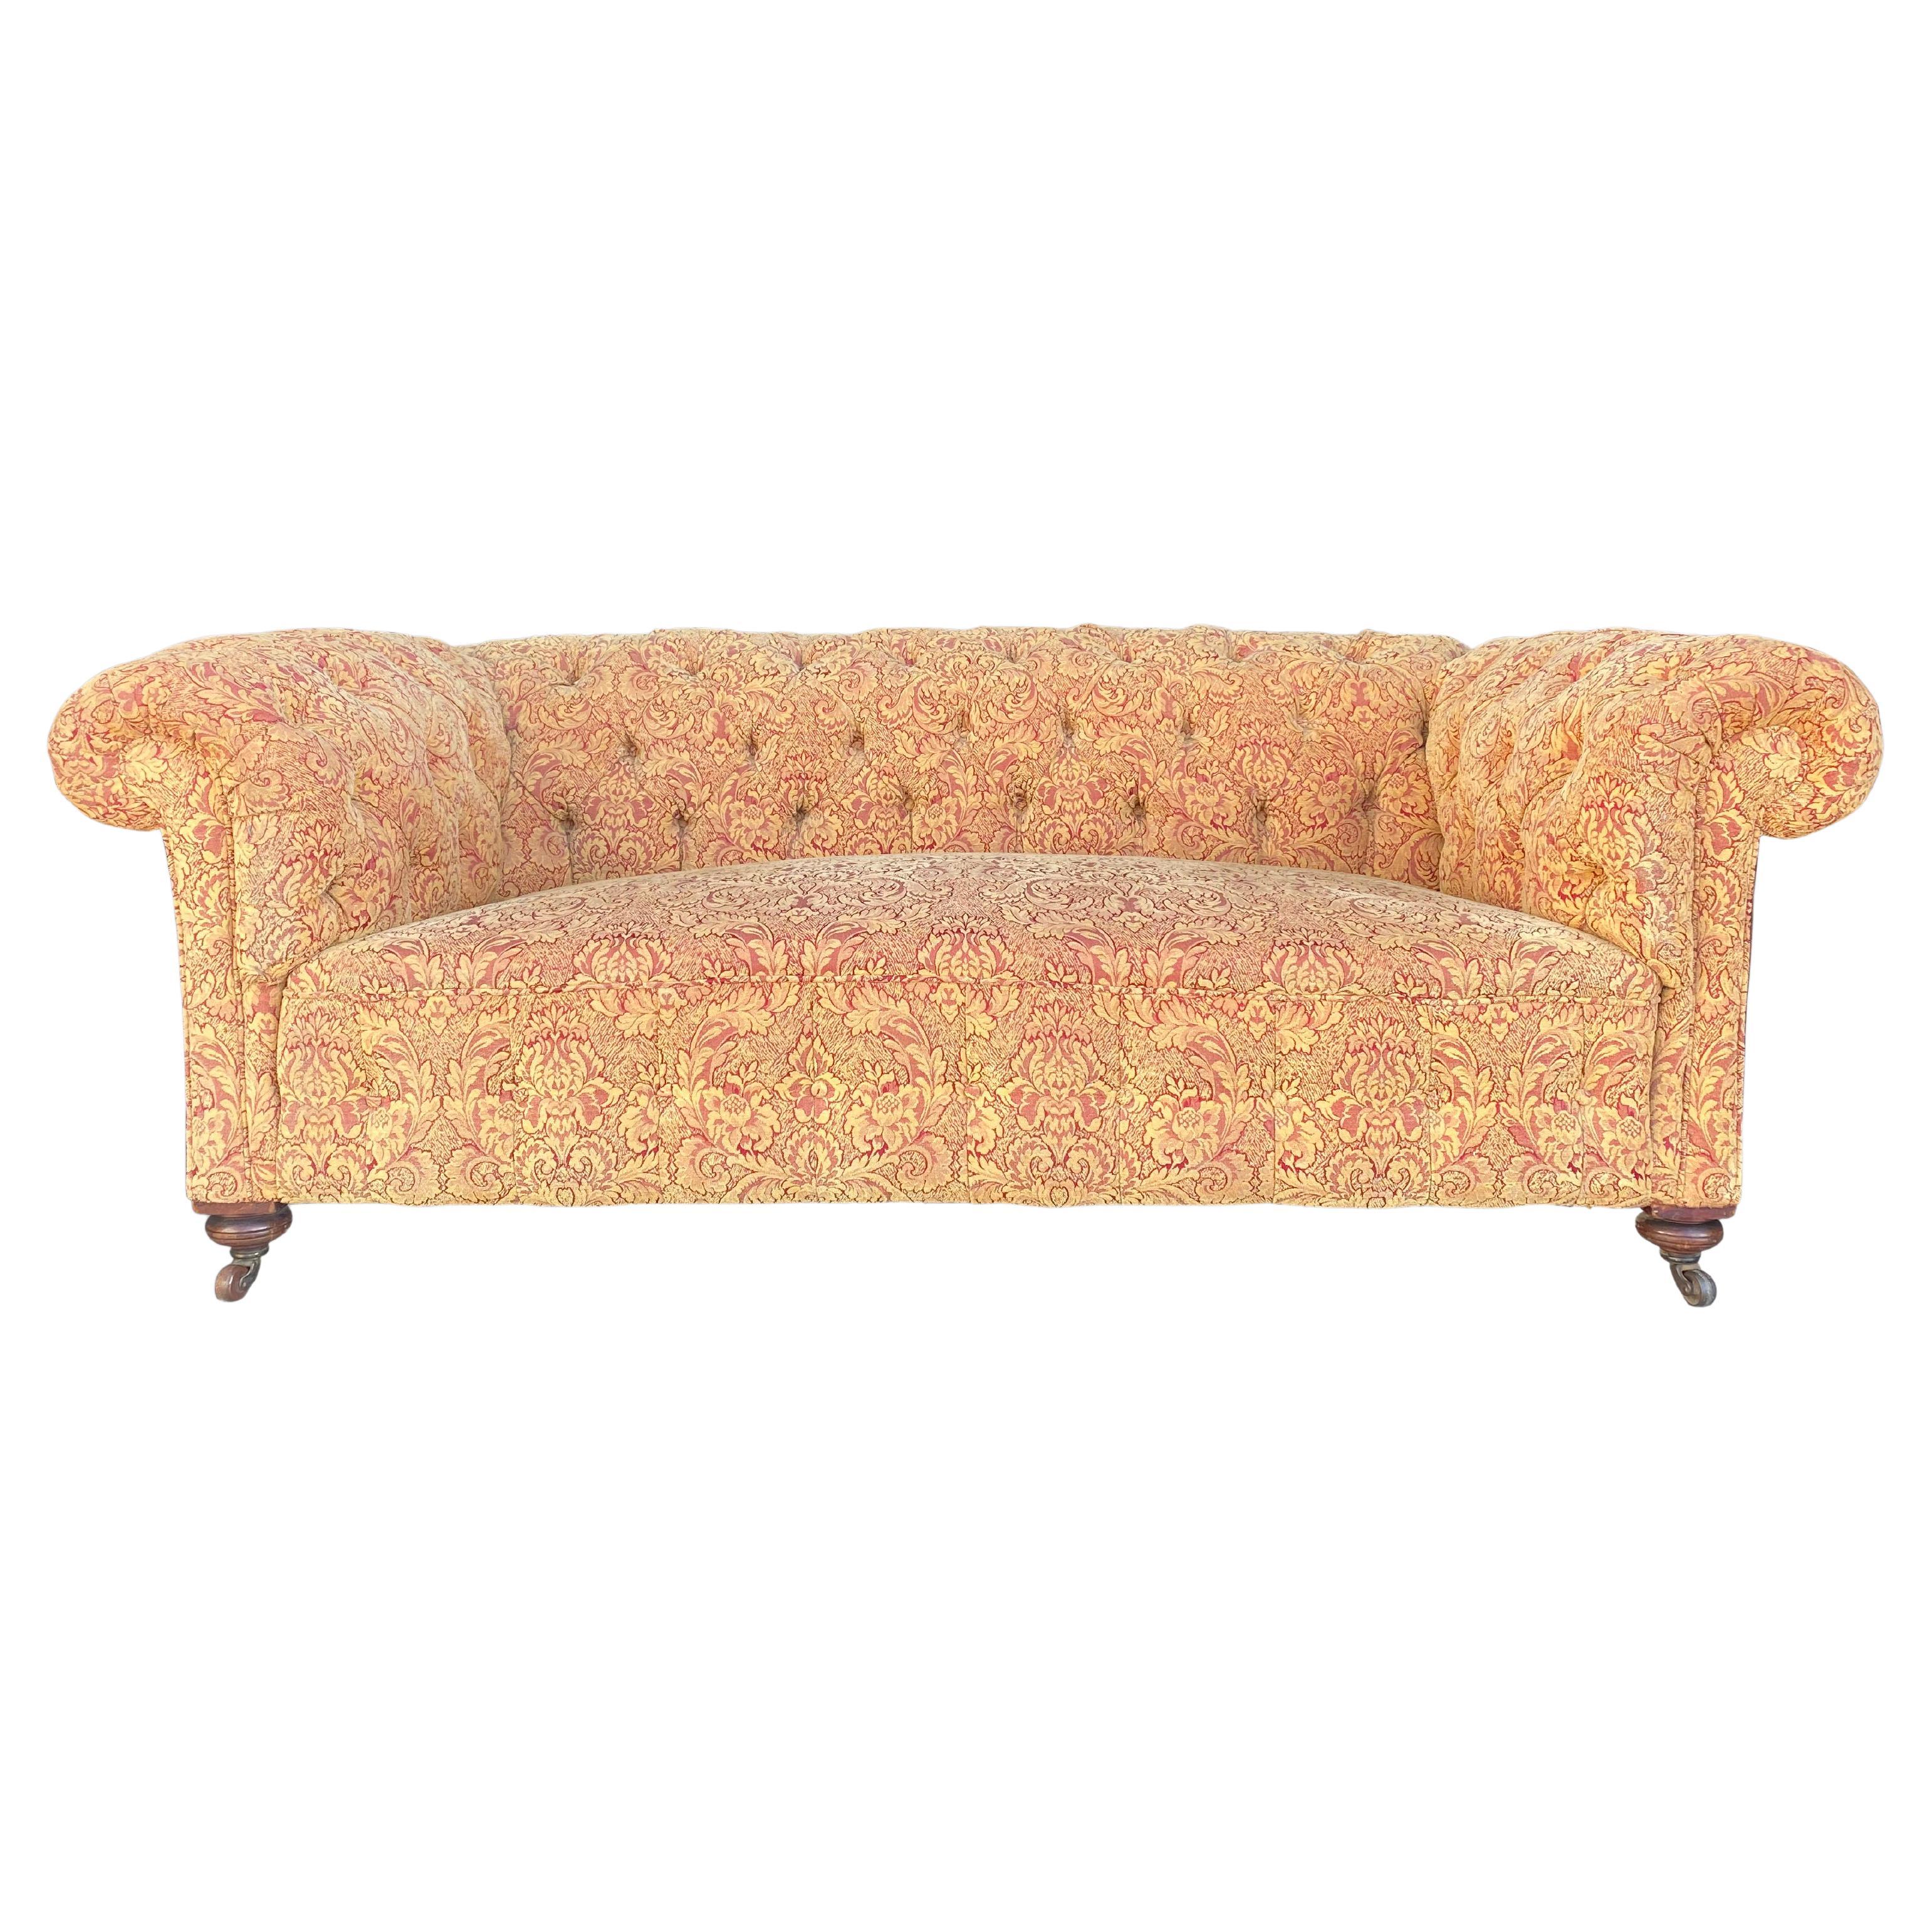 19th Century Victorian Period Upholstered Chesterfield Sofa